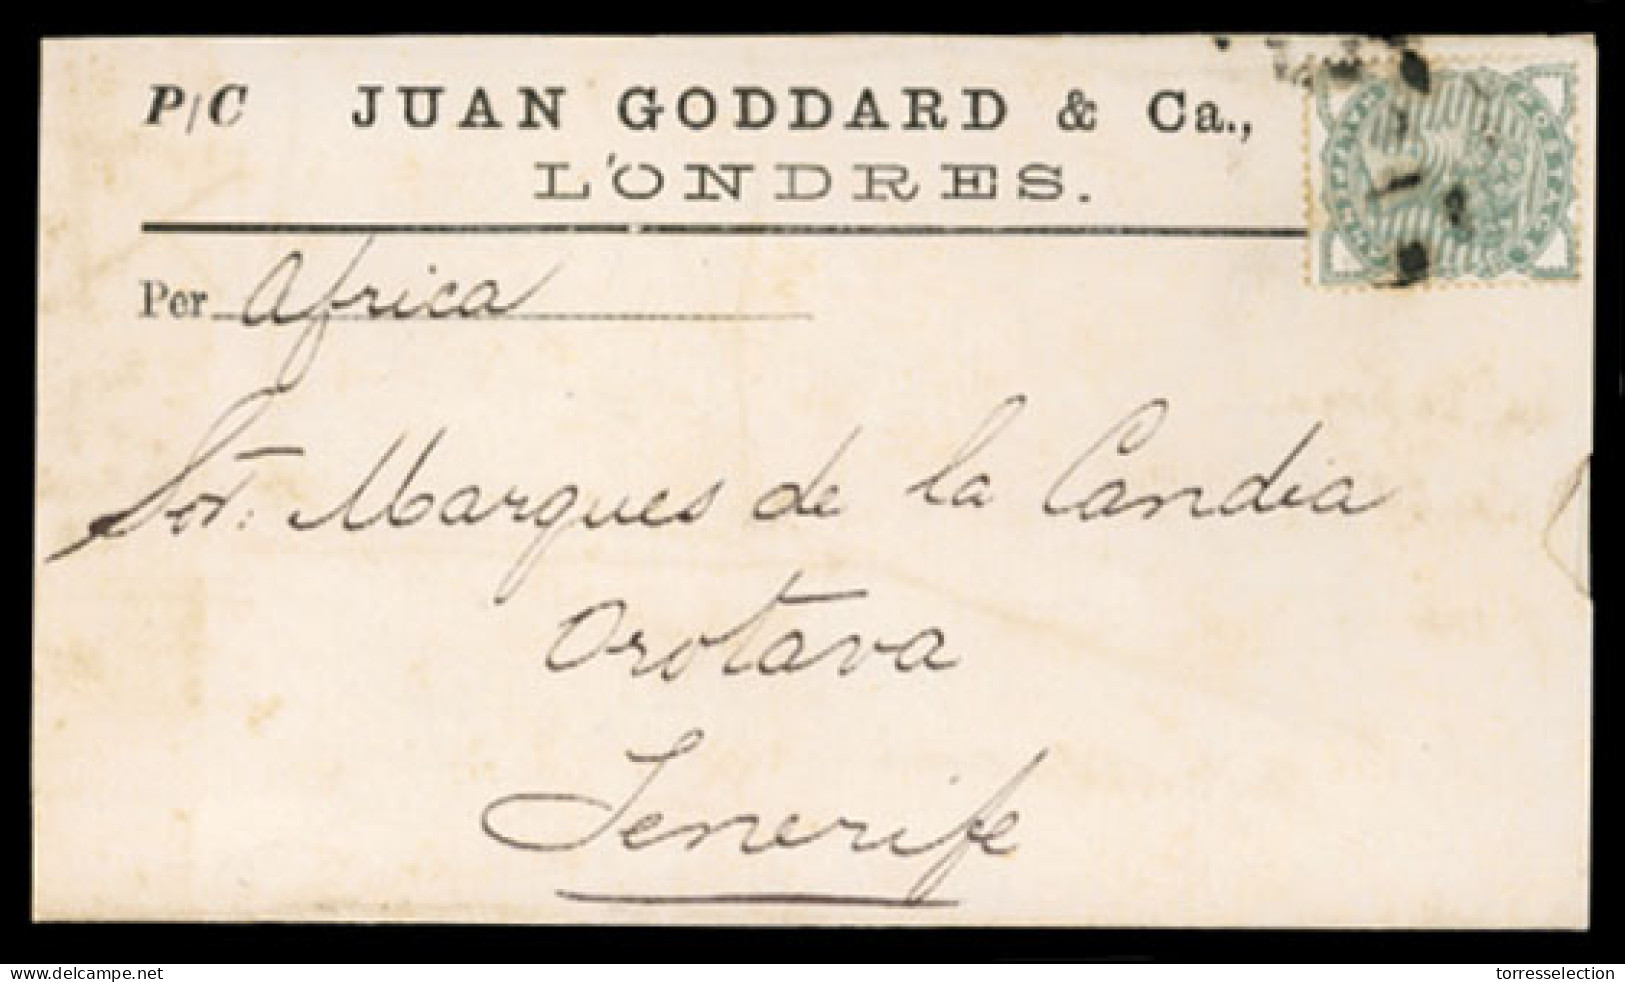 GREAT BRITAIN. 1882. London To Canary Islands. Wrapper 1/2d Rate, Tied. VF. - ...-1840 Vorläufer